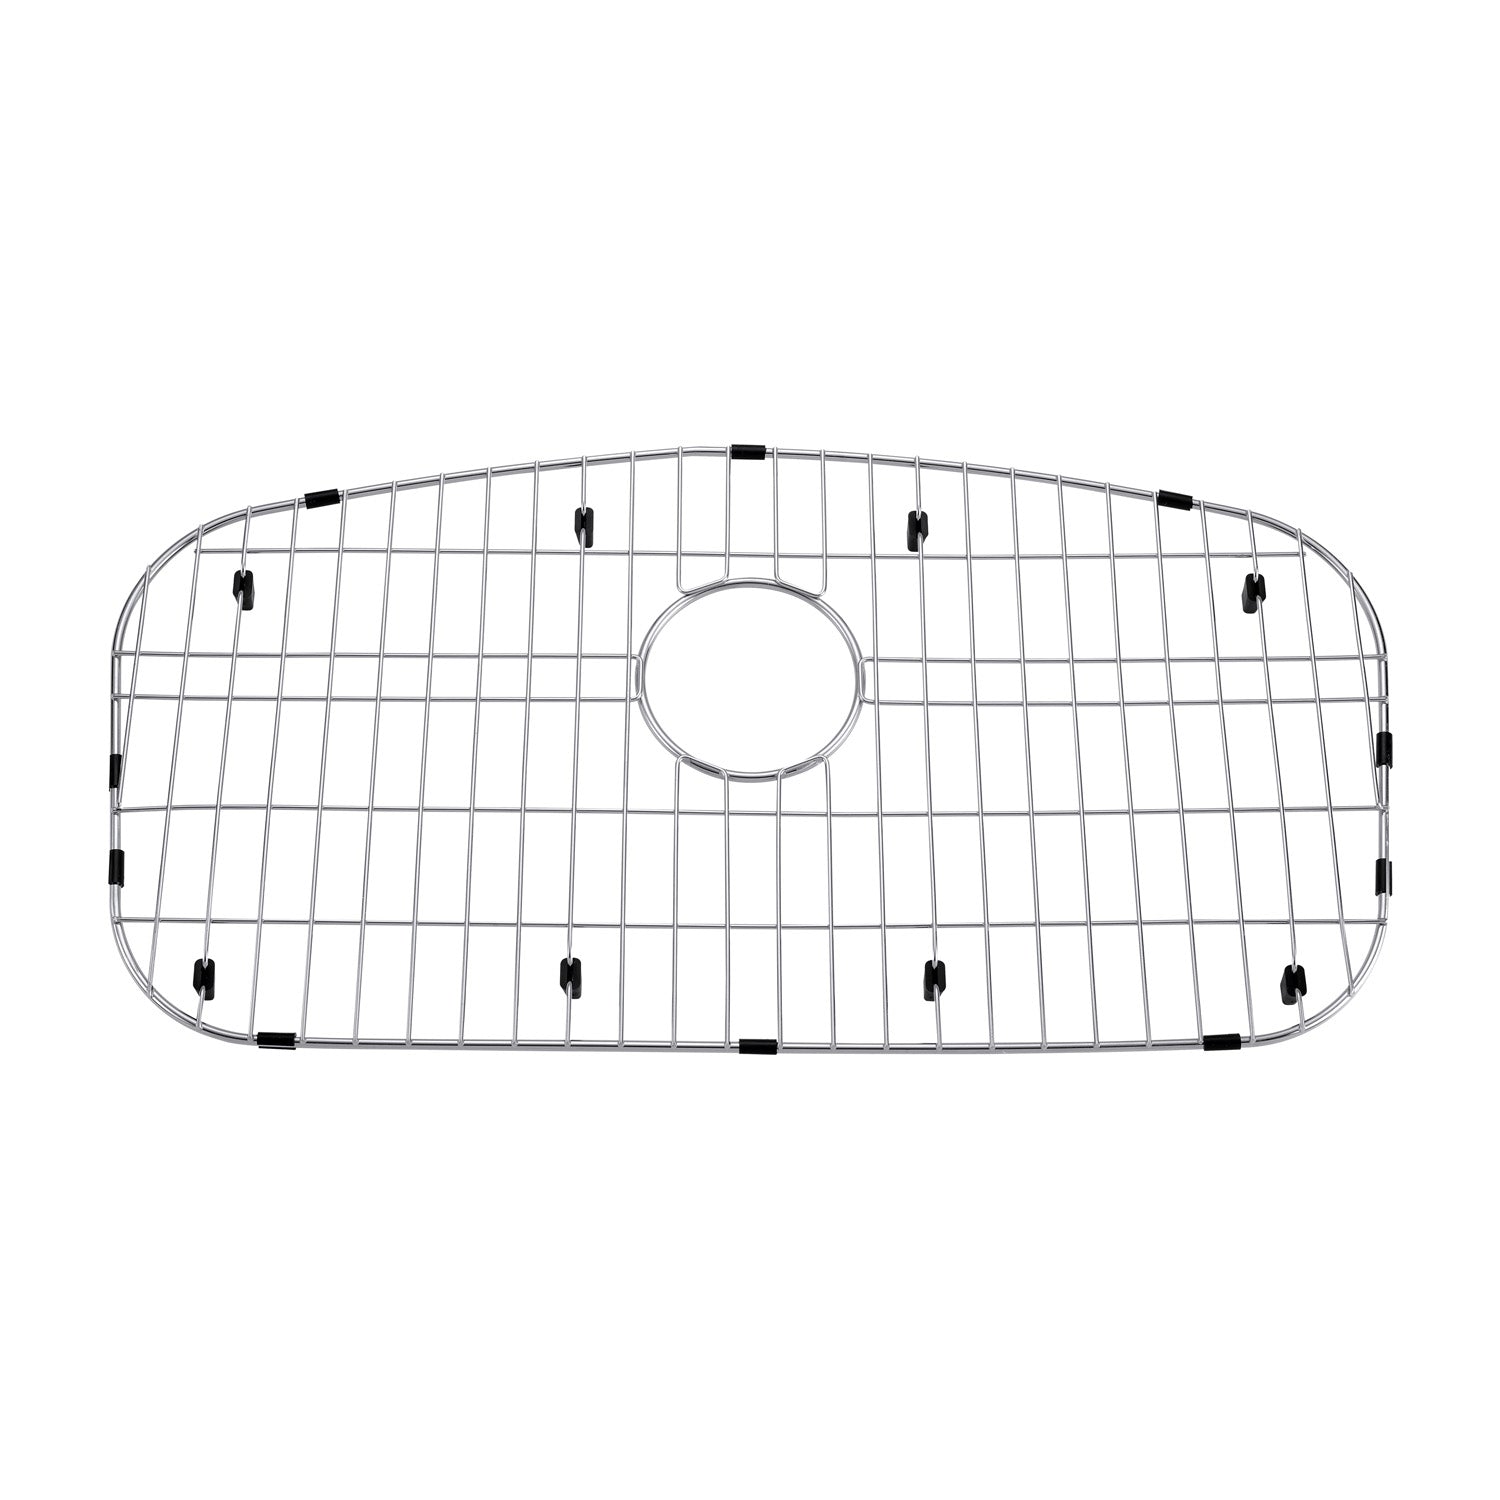 DAX Grid for Kitchen Sink, Stainless Steel Body, Chrome Finish, Compatible with DAX-3319, 30-1/4 x 17-1/2 Inches (GRID-3319)